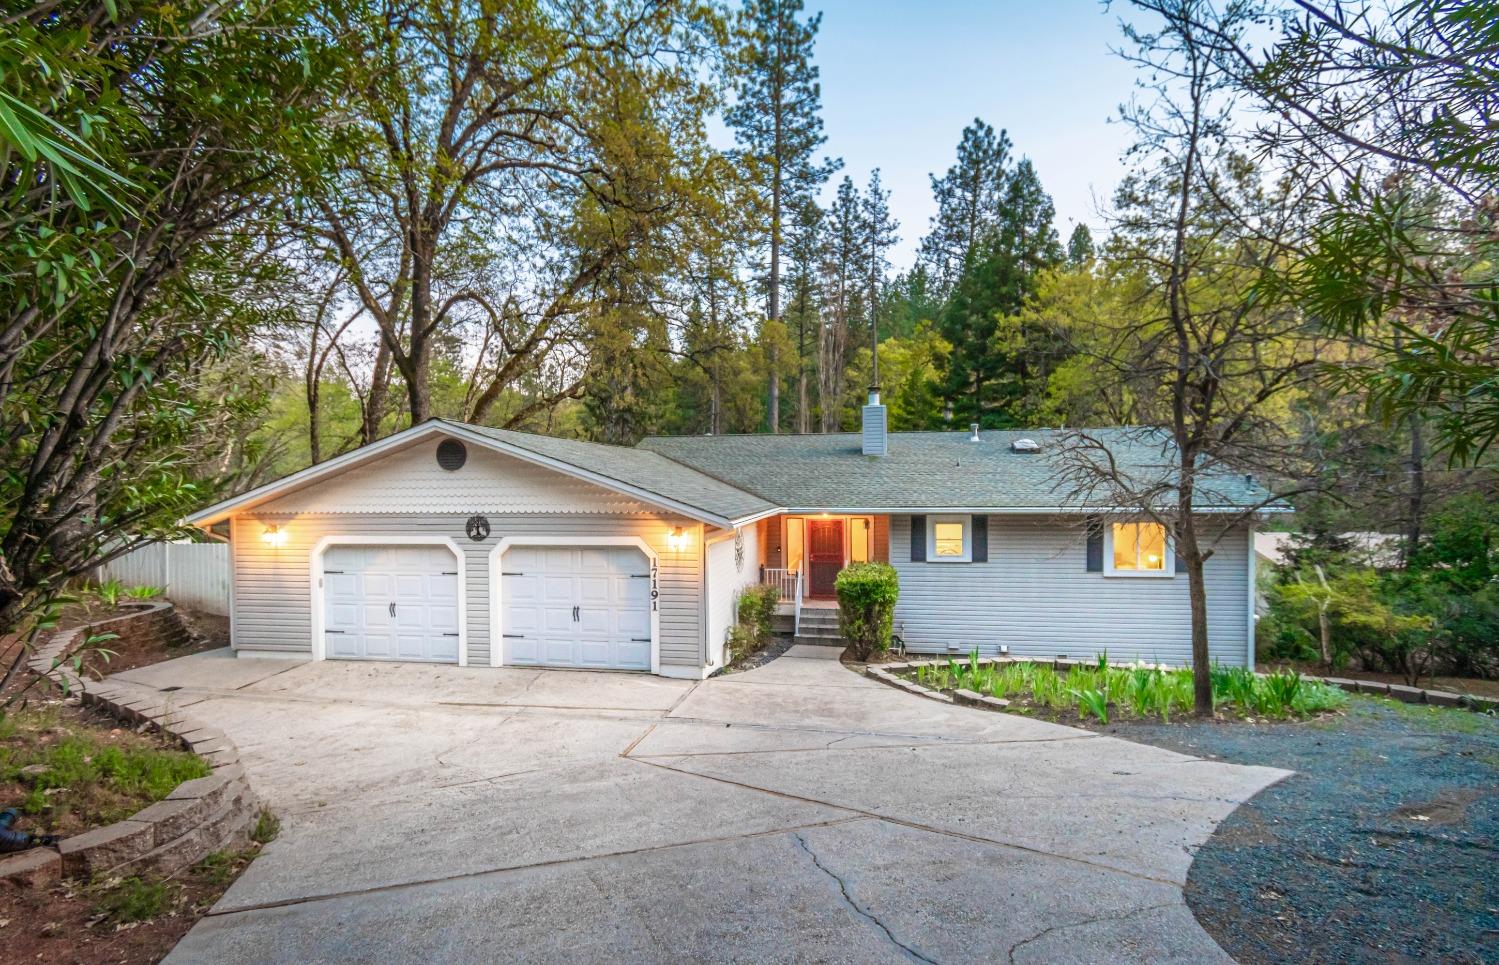 Photo of 17191 Lawrence Wy in Grass Valley, CA